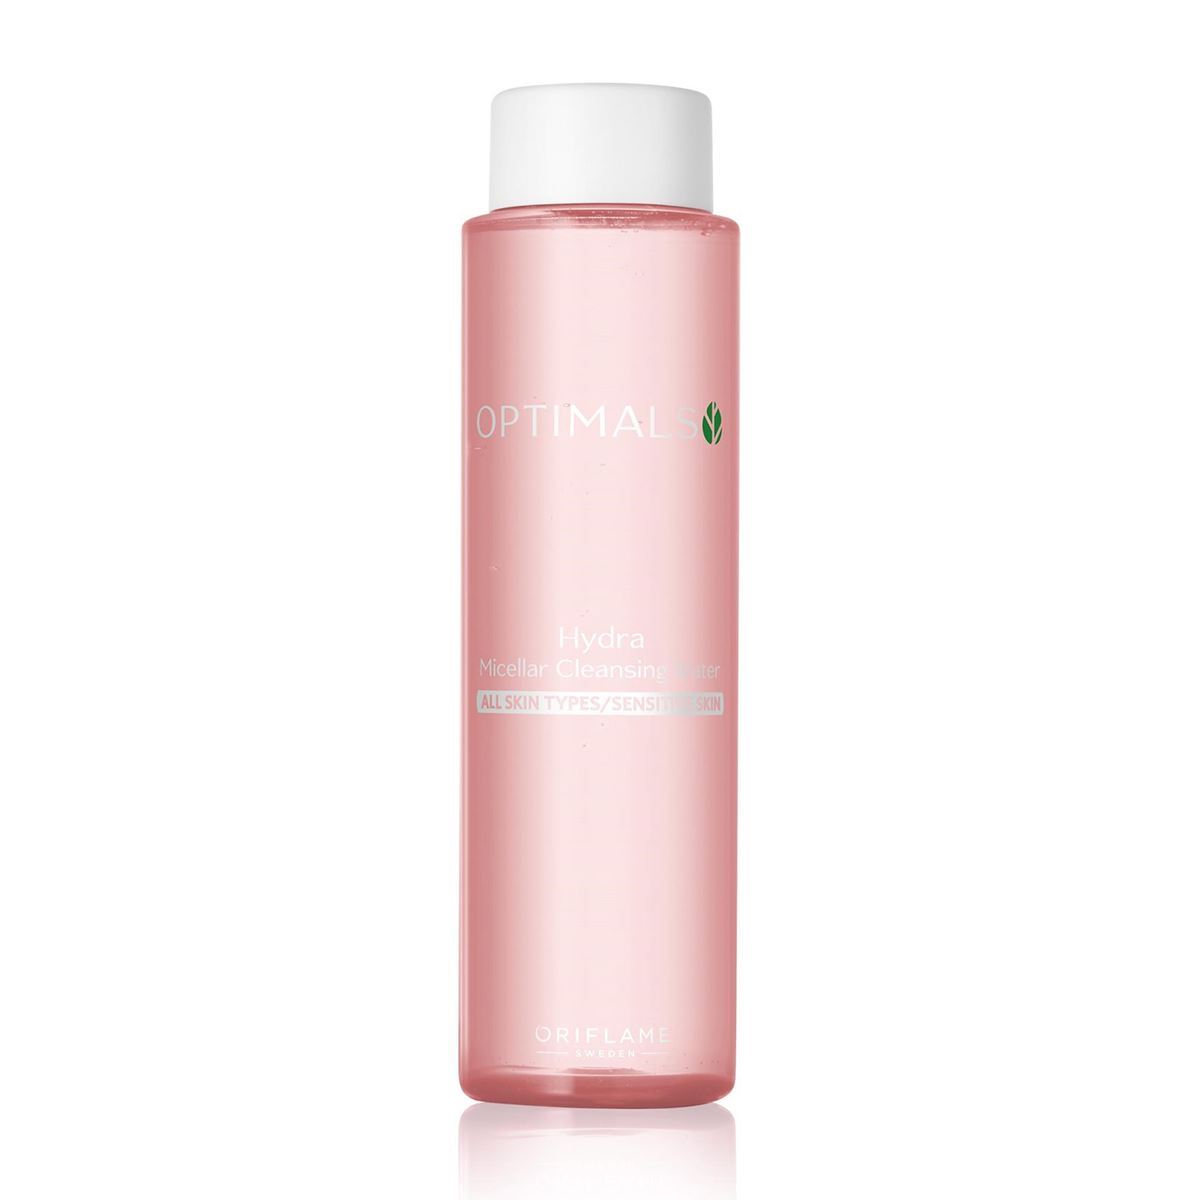 Picture of Optimal Hydra Micellar Cleansing Water